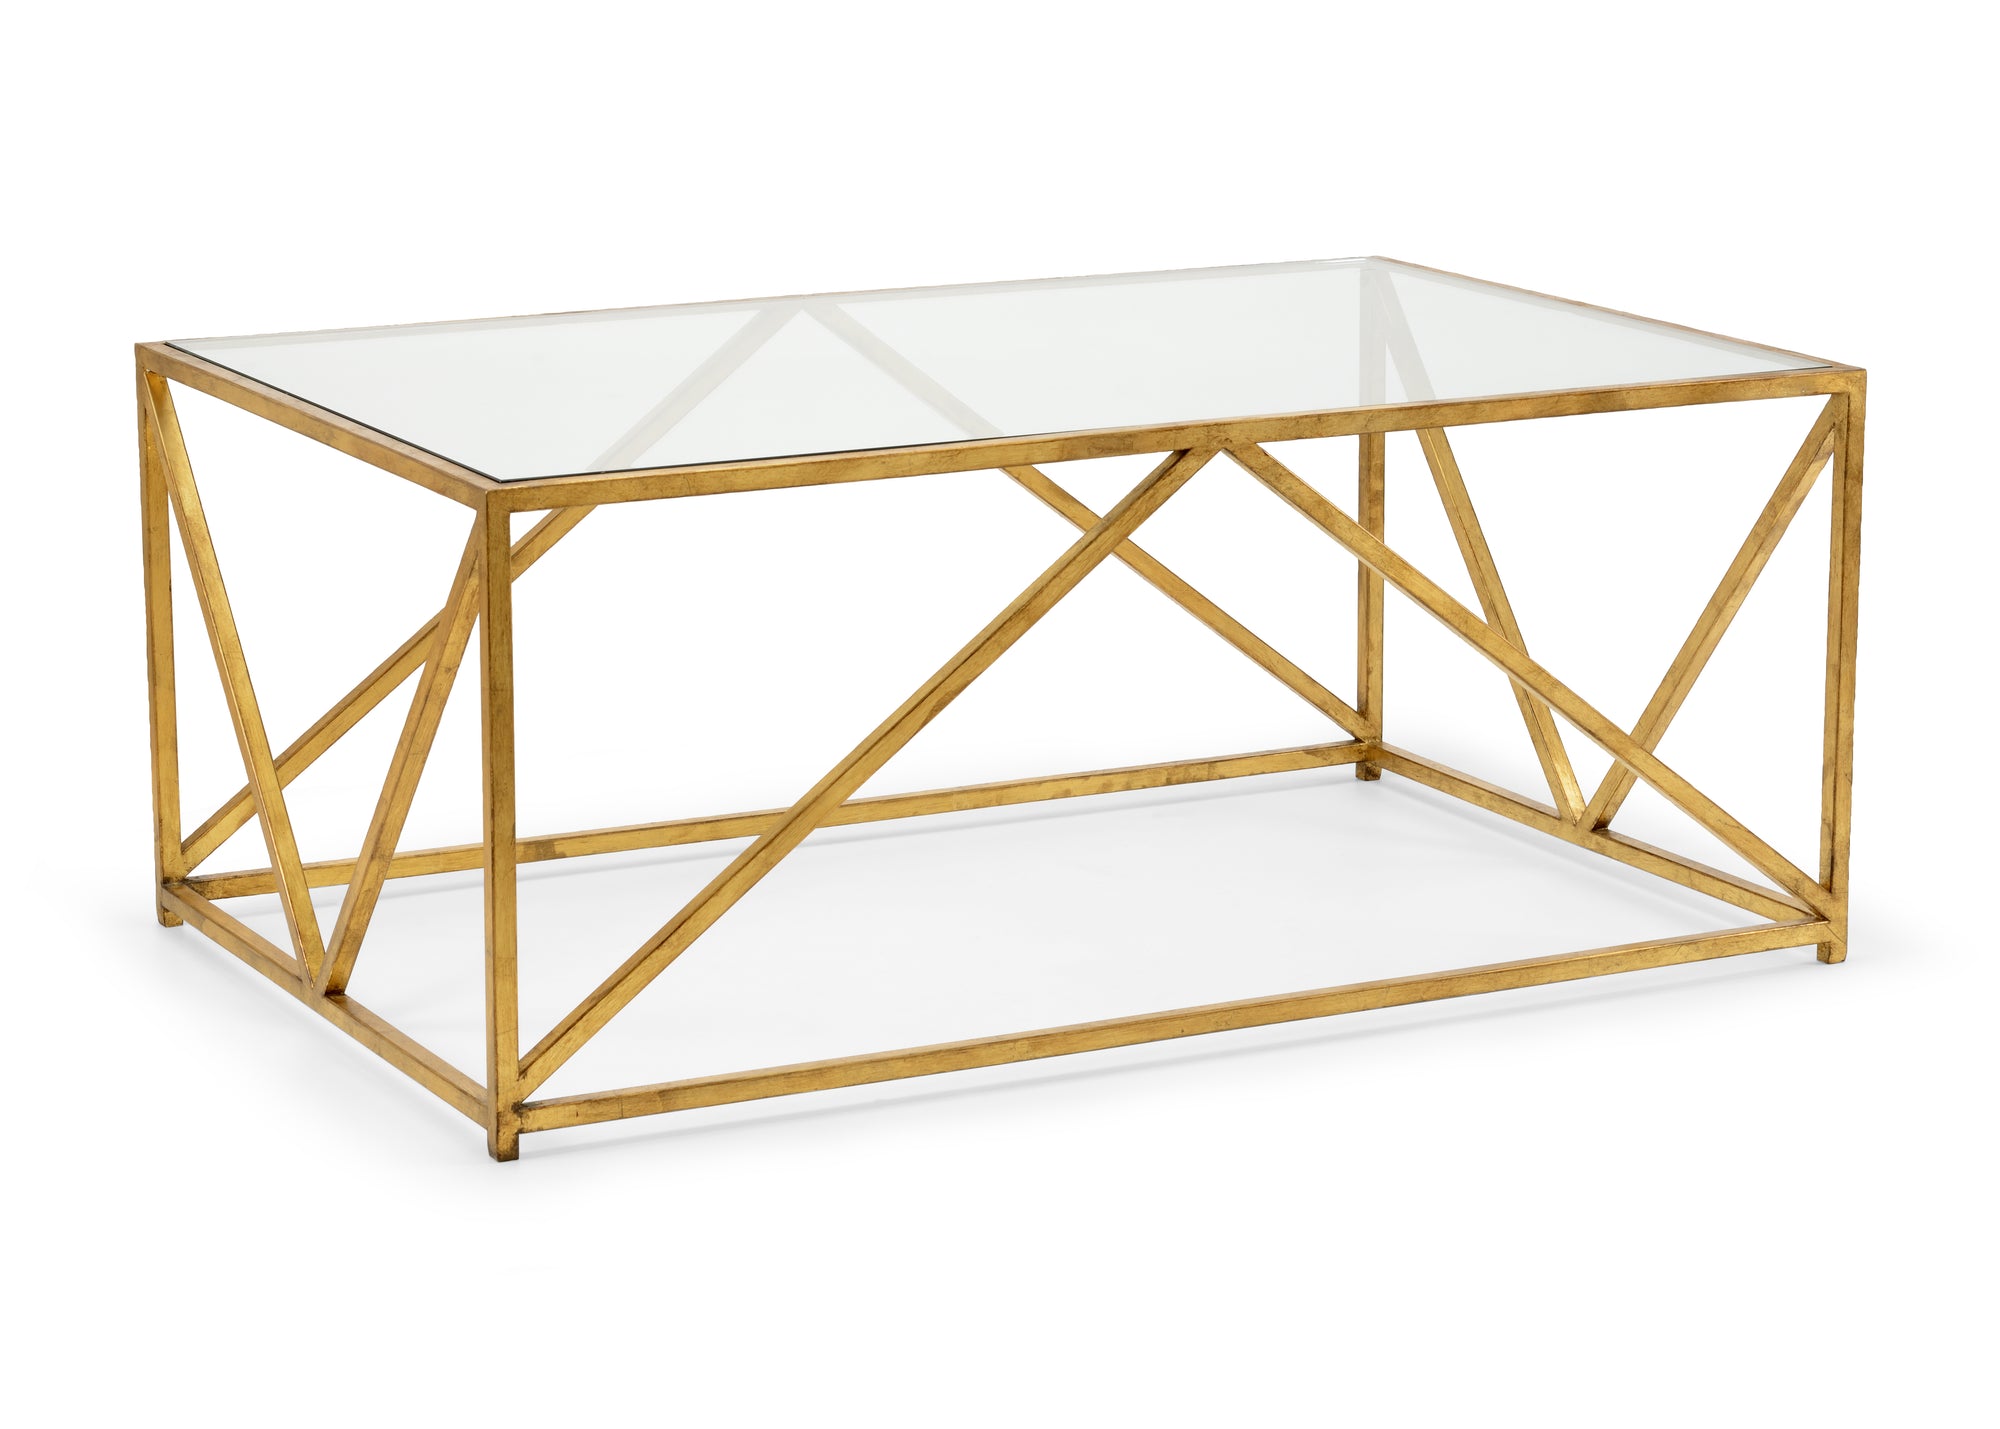 Glass-Top Harlequin Coffee Table from the Jamie Merida Collection for Chelsea House - antique gold base with glass top isolated on white background